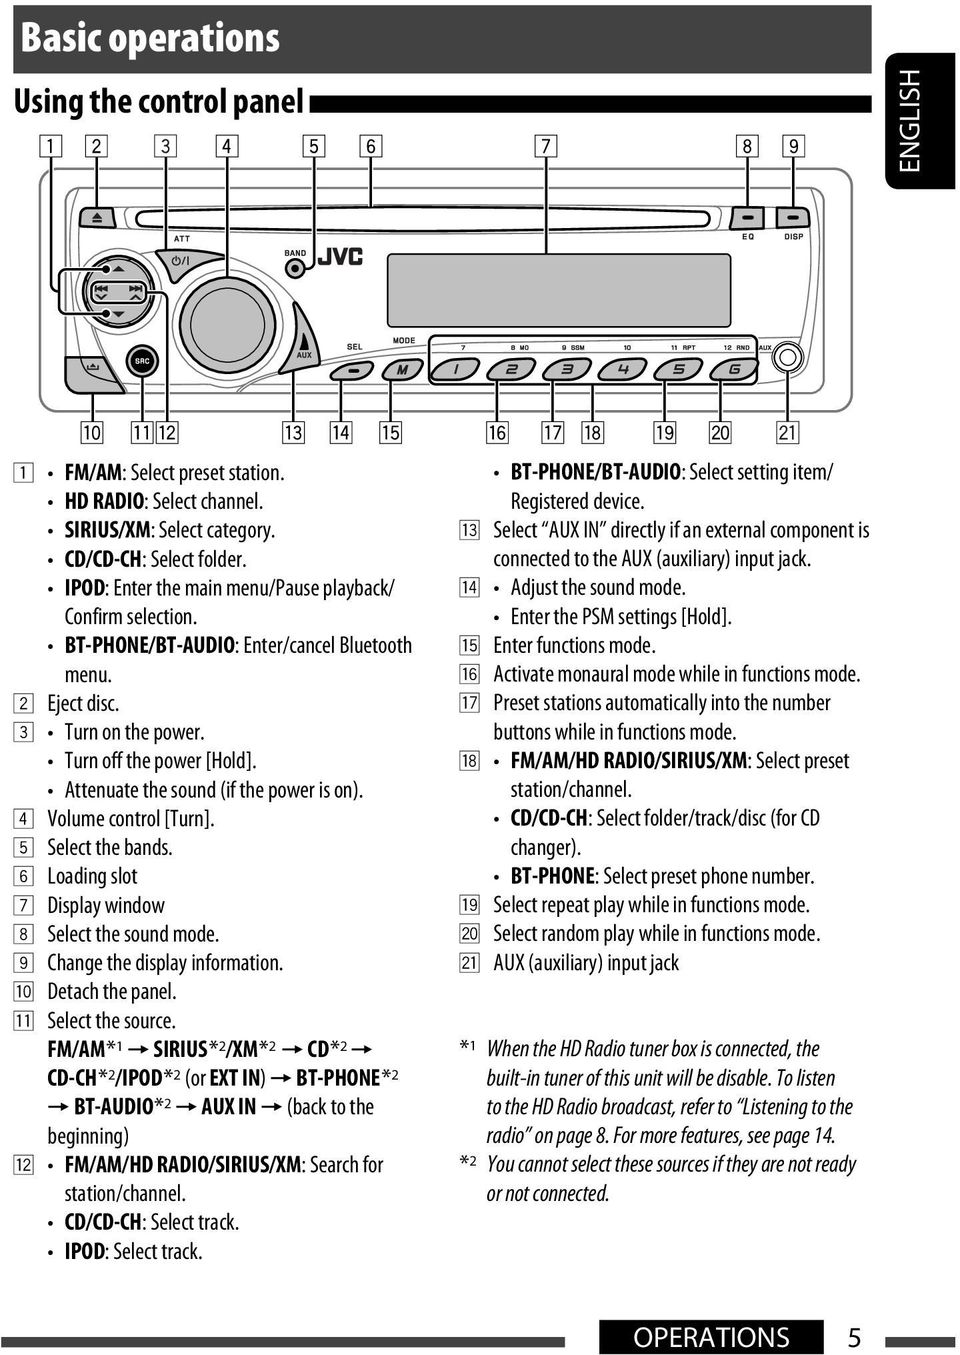 Attenuate the sound (if the power is on). 4 Volume control [Turn]. 5 Select the bands. 6 Loading slot 7 Display window 8 Select the sound mode. 9 Change the display information. p Detach the panel.